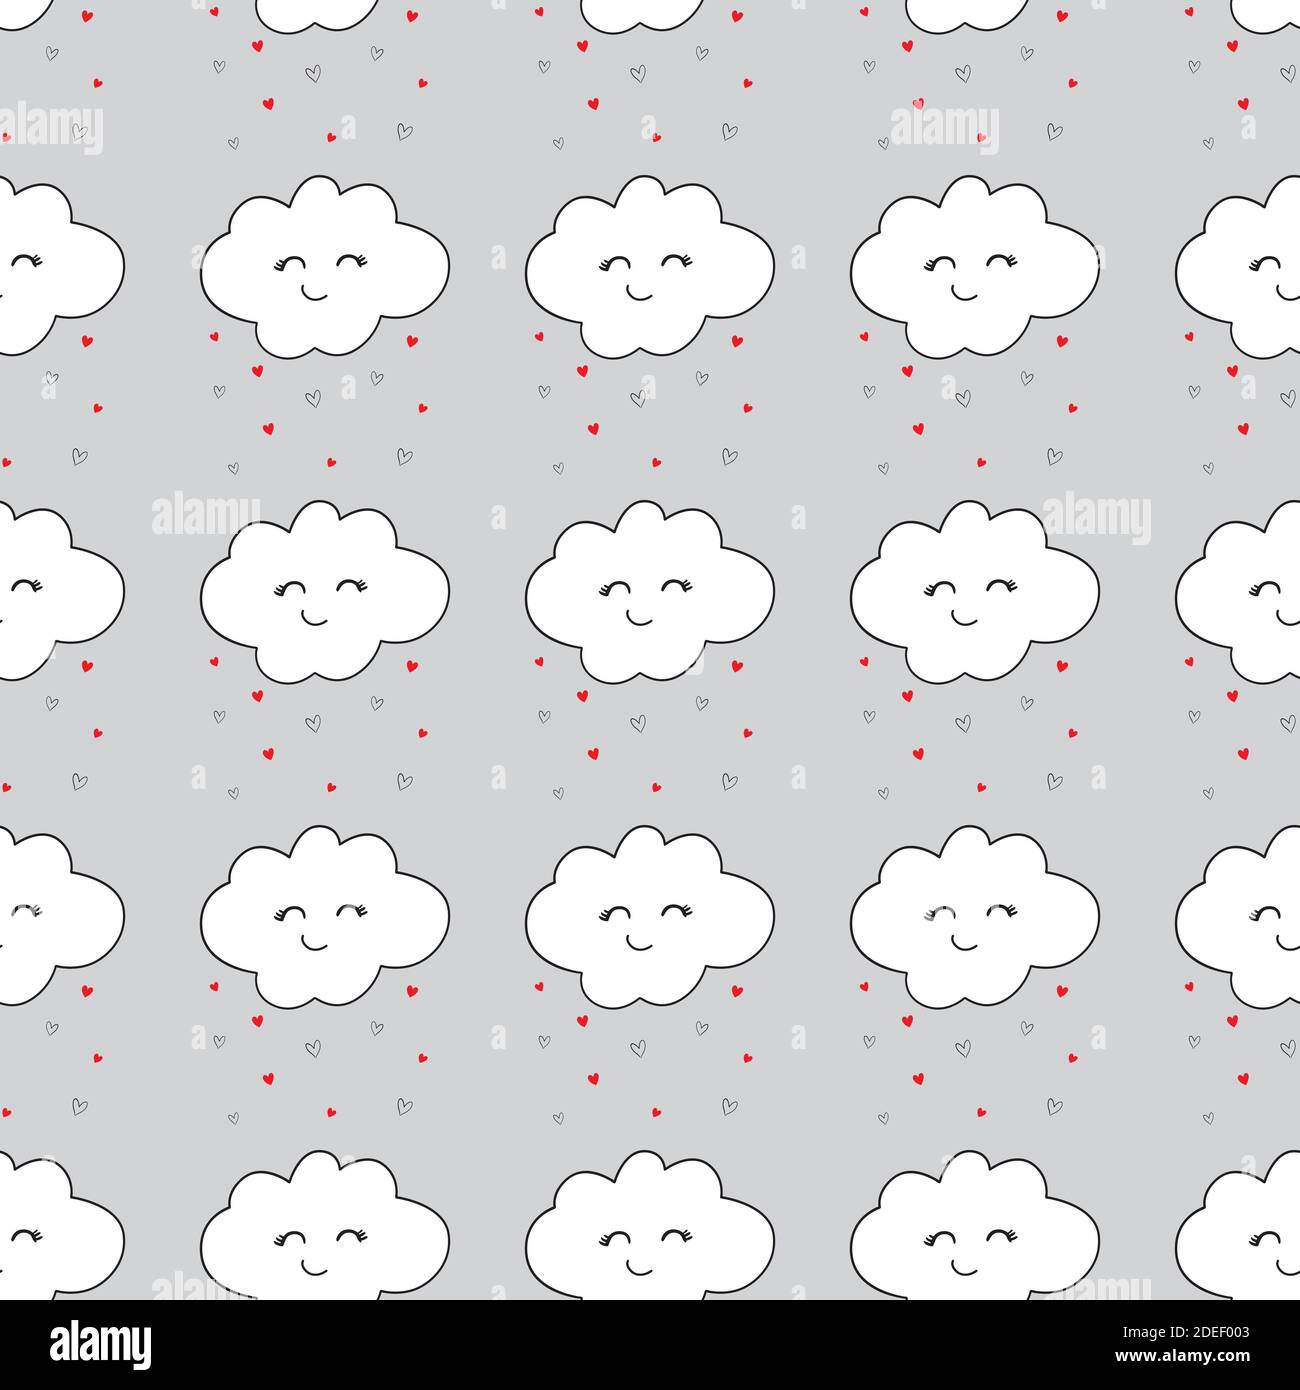 Seamless pattern with smiling sleeping clouds for kids holidays. Cute baby shower vector background clouds seamless vector pattern. Stock Vector